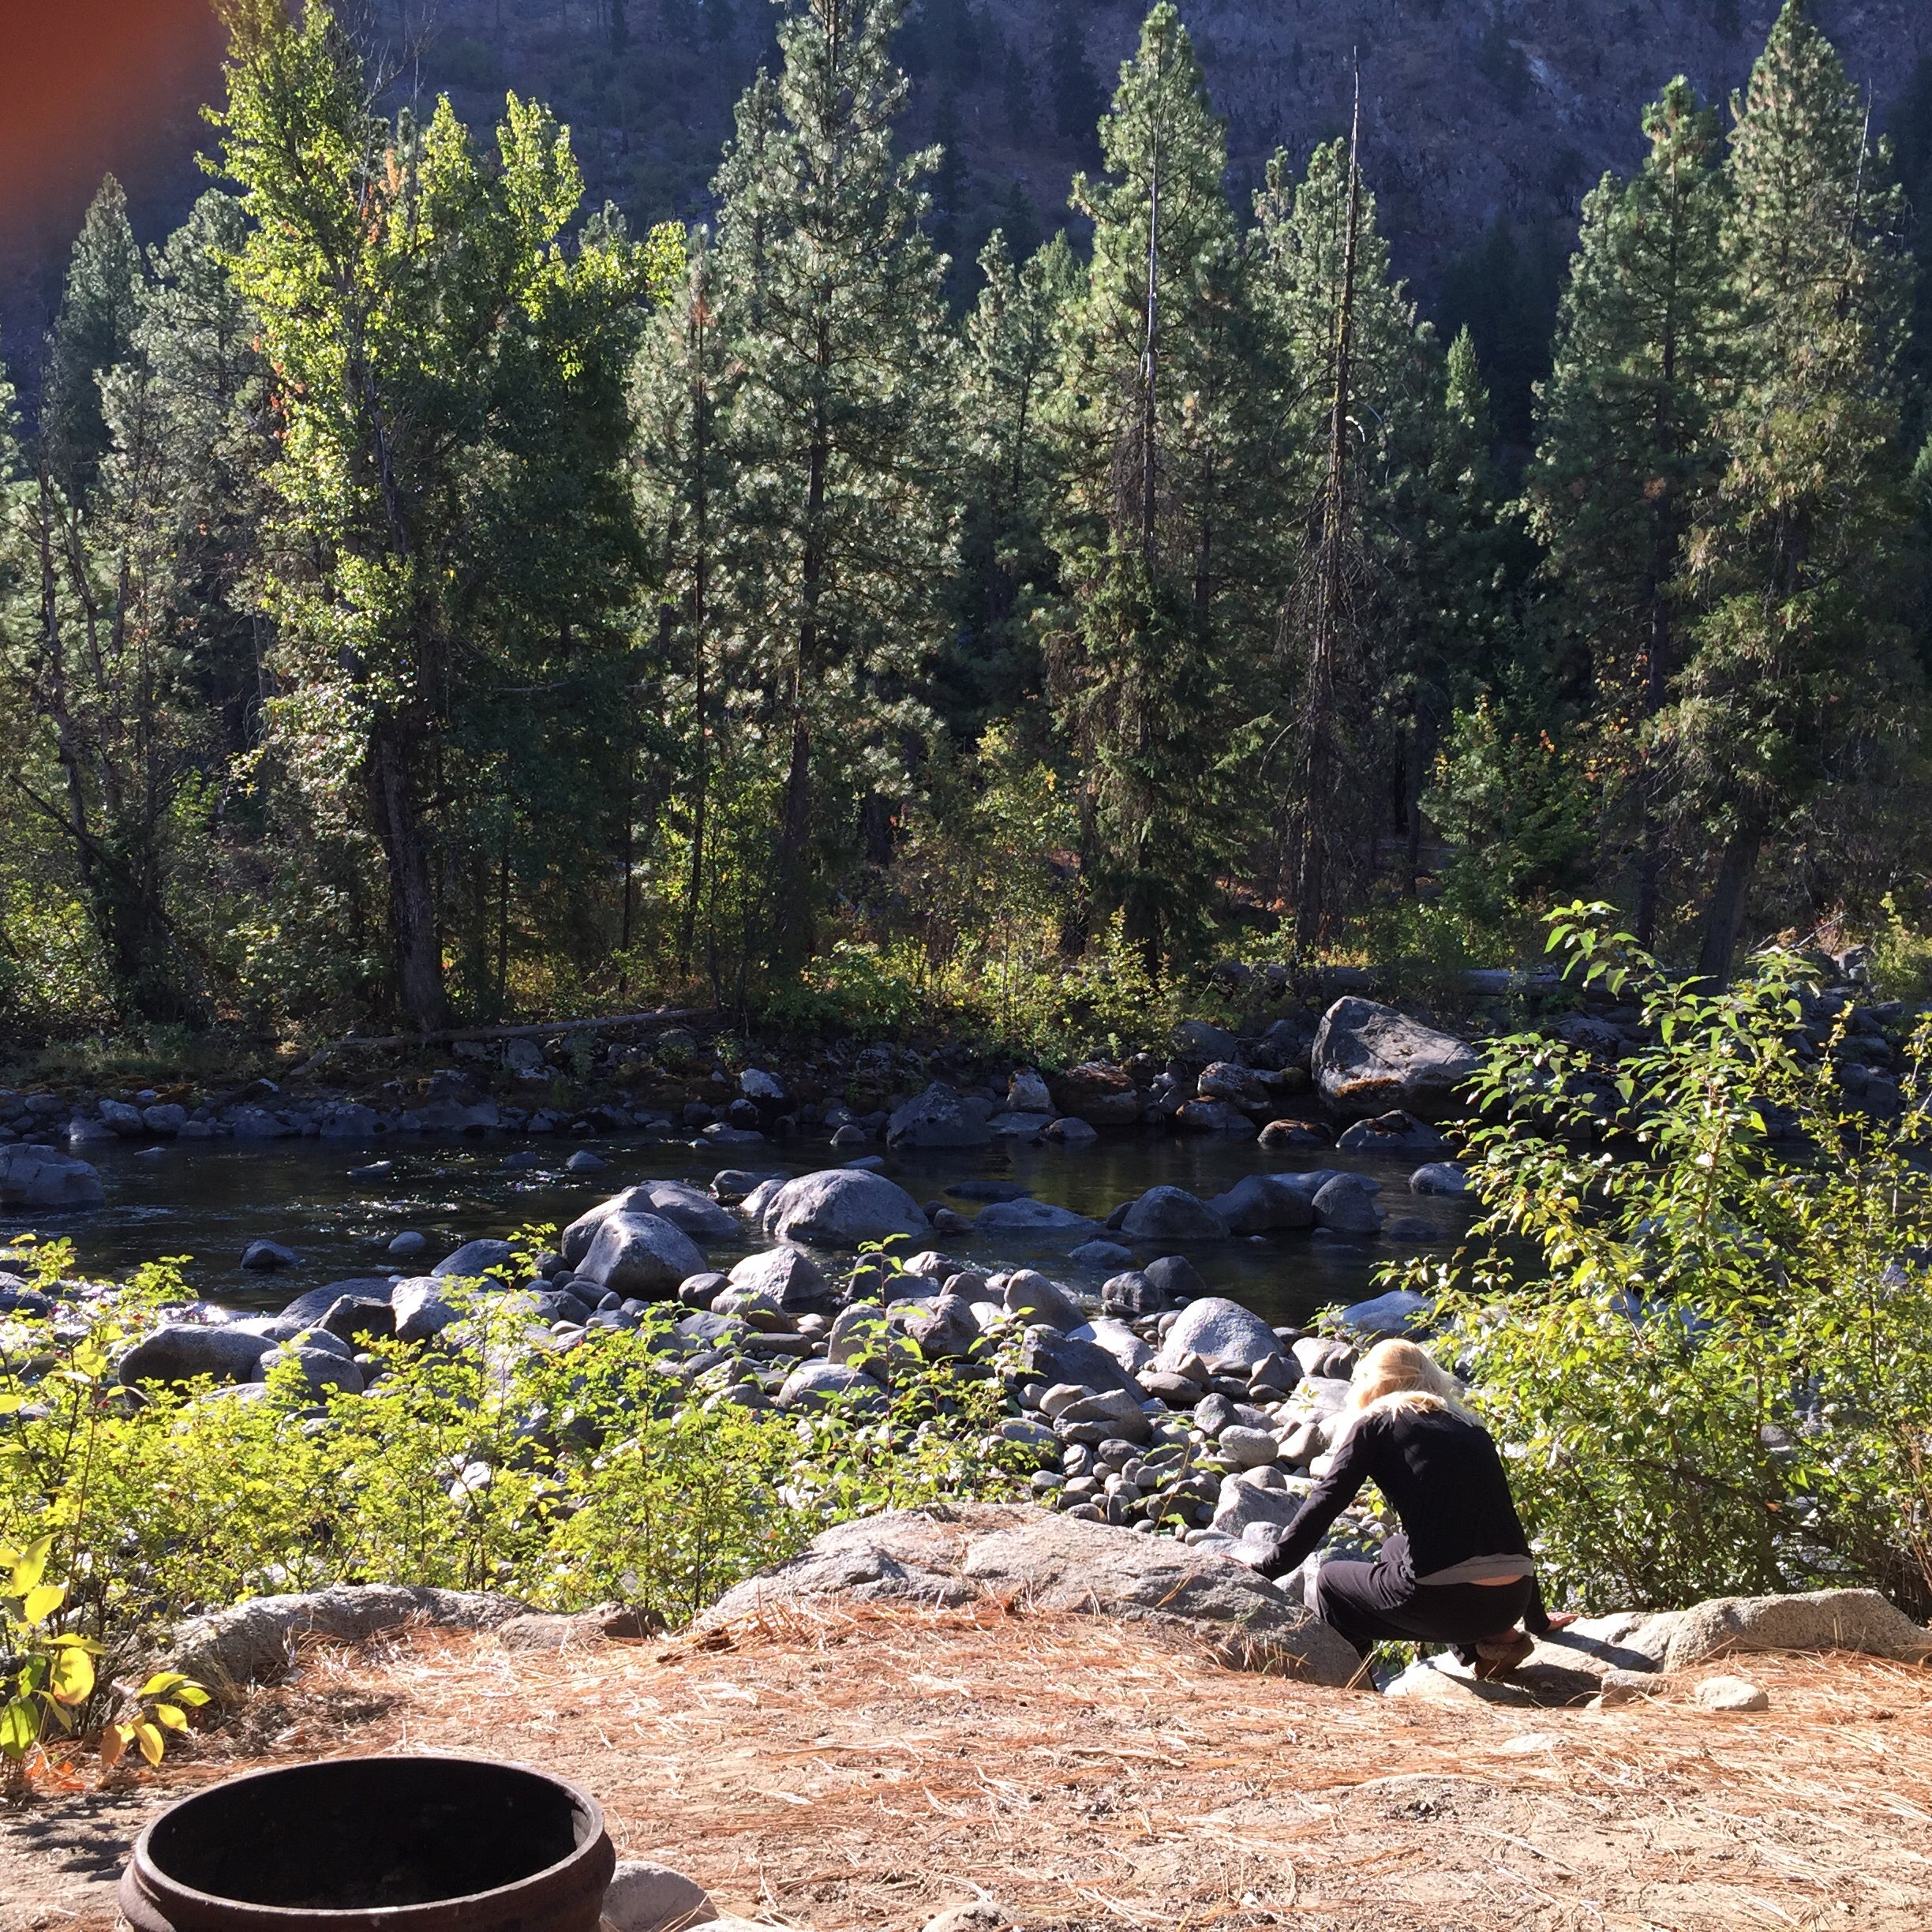 Camper submitted image from Thousand Trails Leavenworth - 2